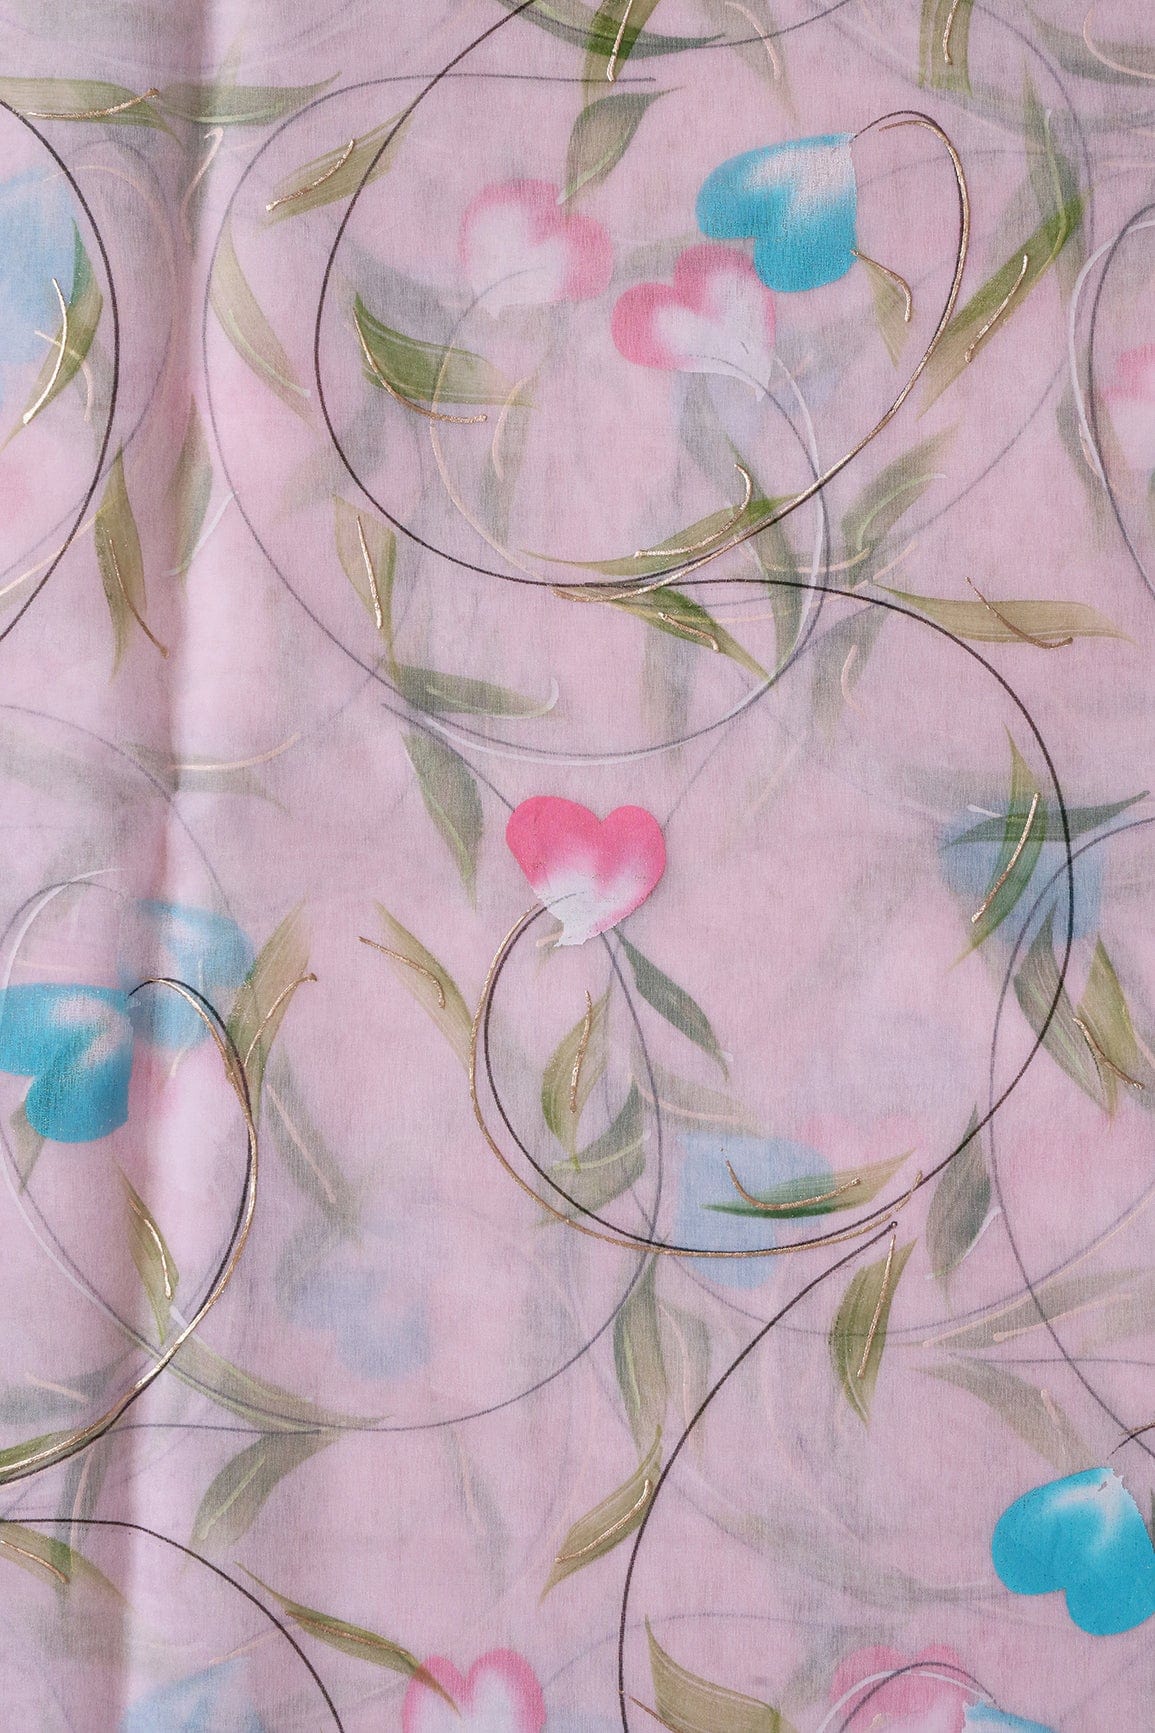 doeraa Embroidery Fabrics Beautiful Floral Hand Painted With Foil Work On Pink Organza Fabric